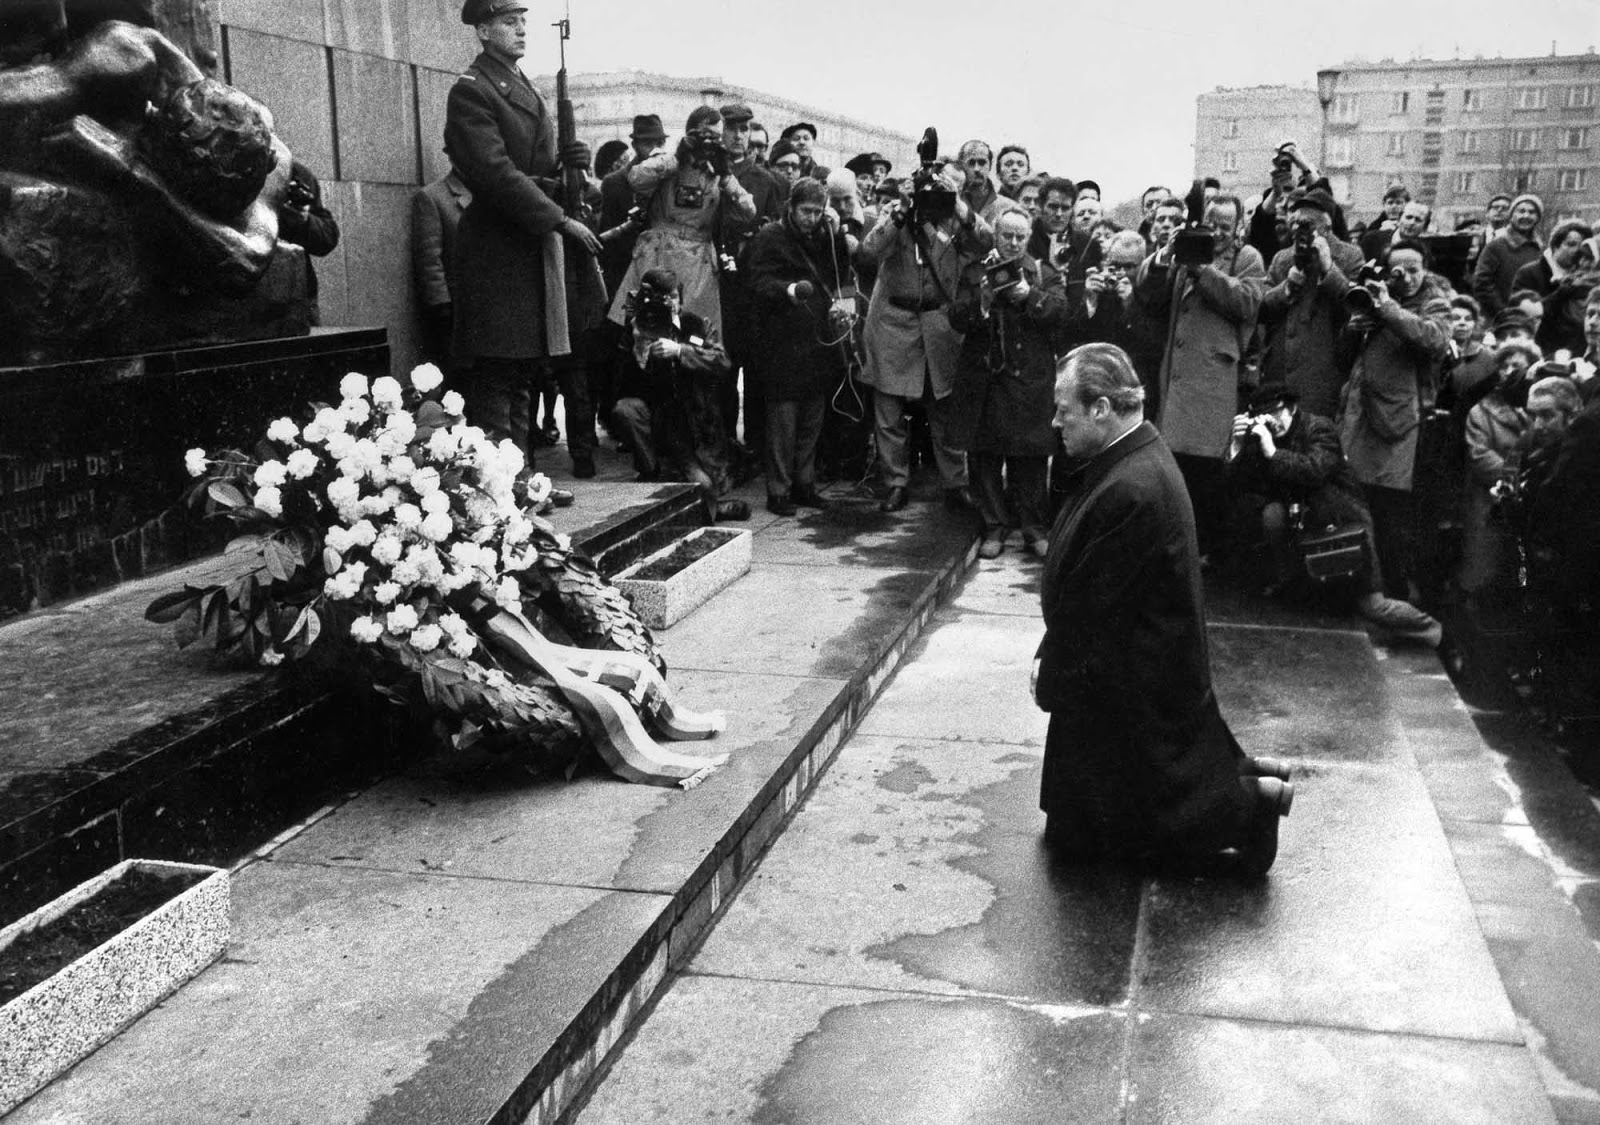 Kniefall von Warschau (German for “Warsaw Genuflection”) refers to a gesture of humility and penance by German Chancellor Willy Brandt in 1970 towards the victims of the Warsaw Ghetto Uprising.